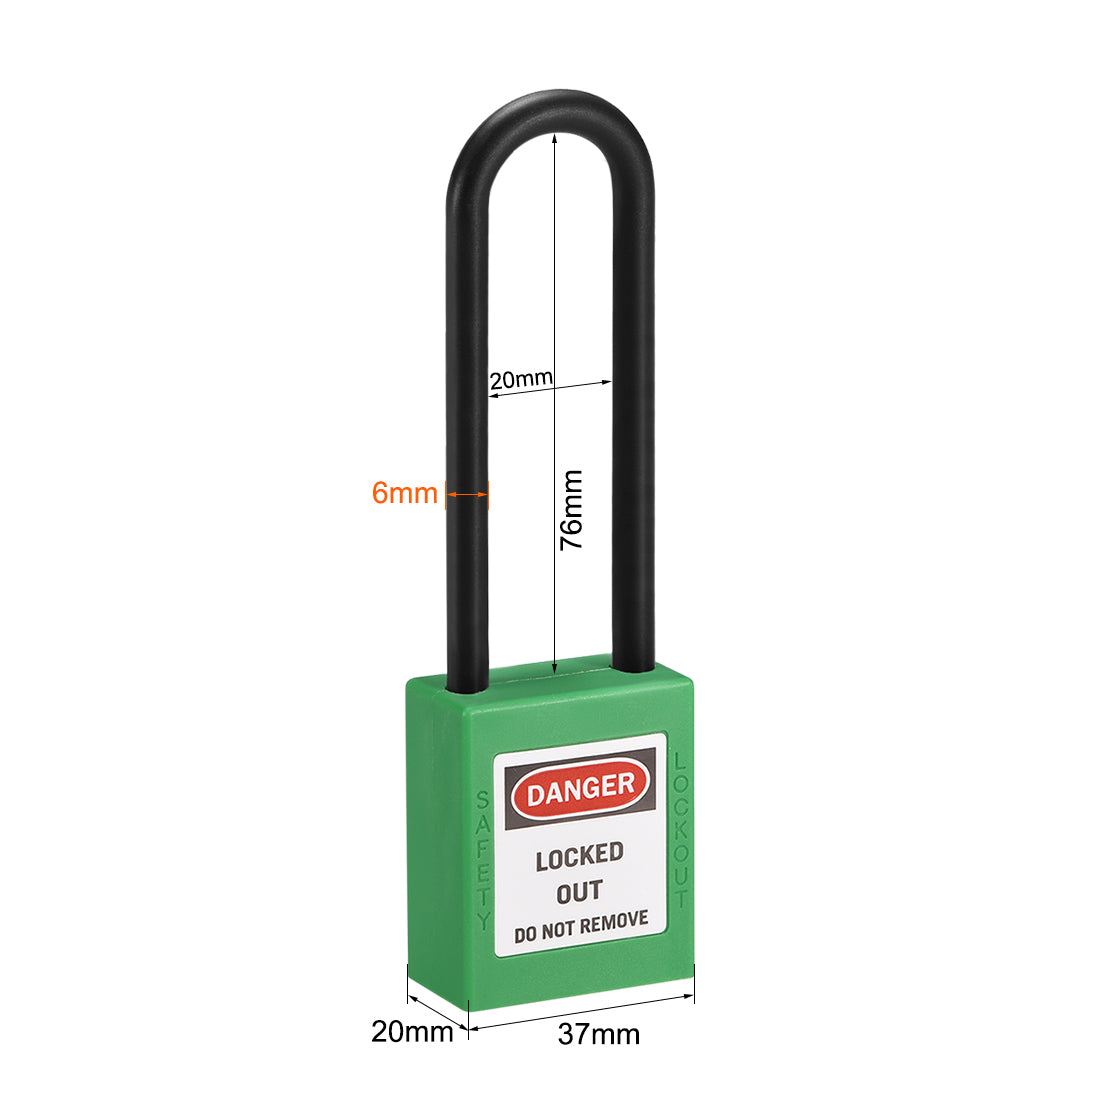 uxcell Uxcell Lockout Tagout Safety Padlock 76mm Nylon Shackle Keyed Alike Light Green 2Pcs